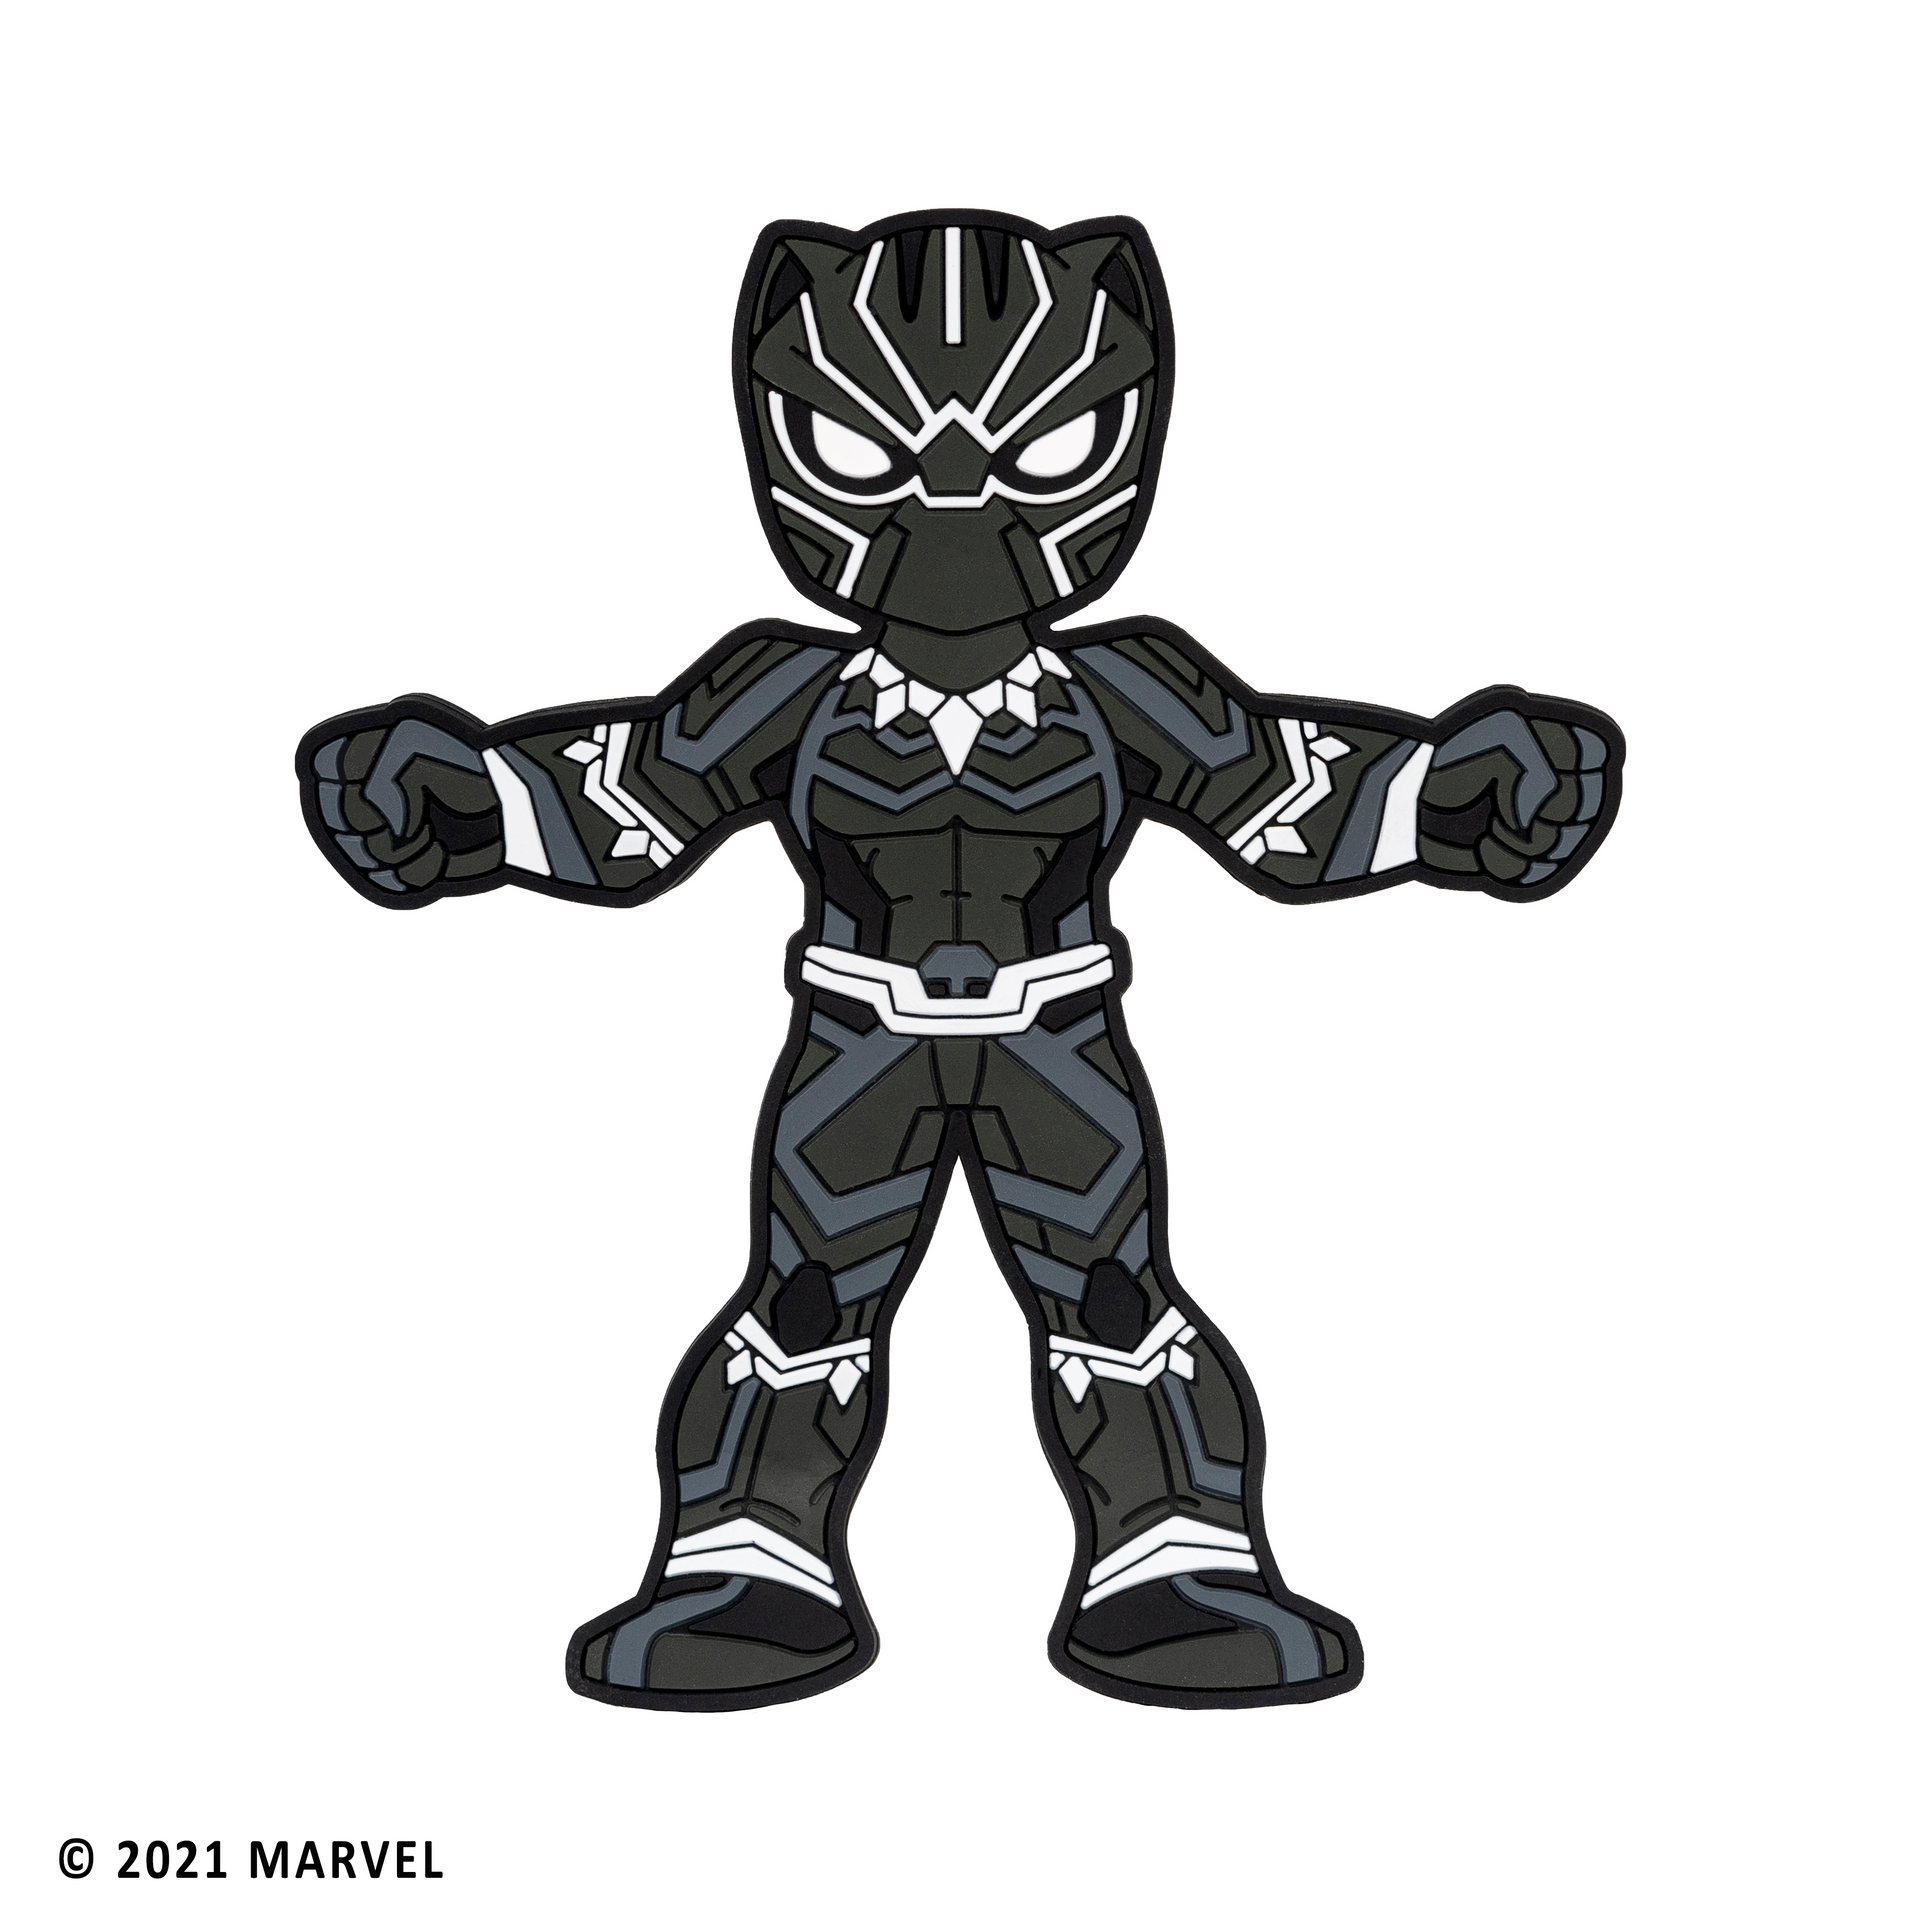 Image of Marvel Black Panther Hug Buddy on a white background with arms and legs spread out.